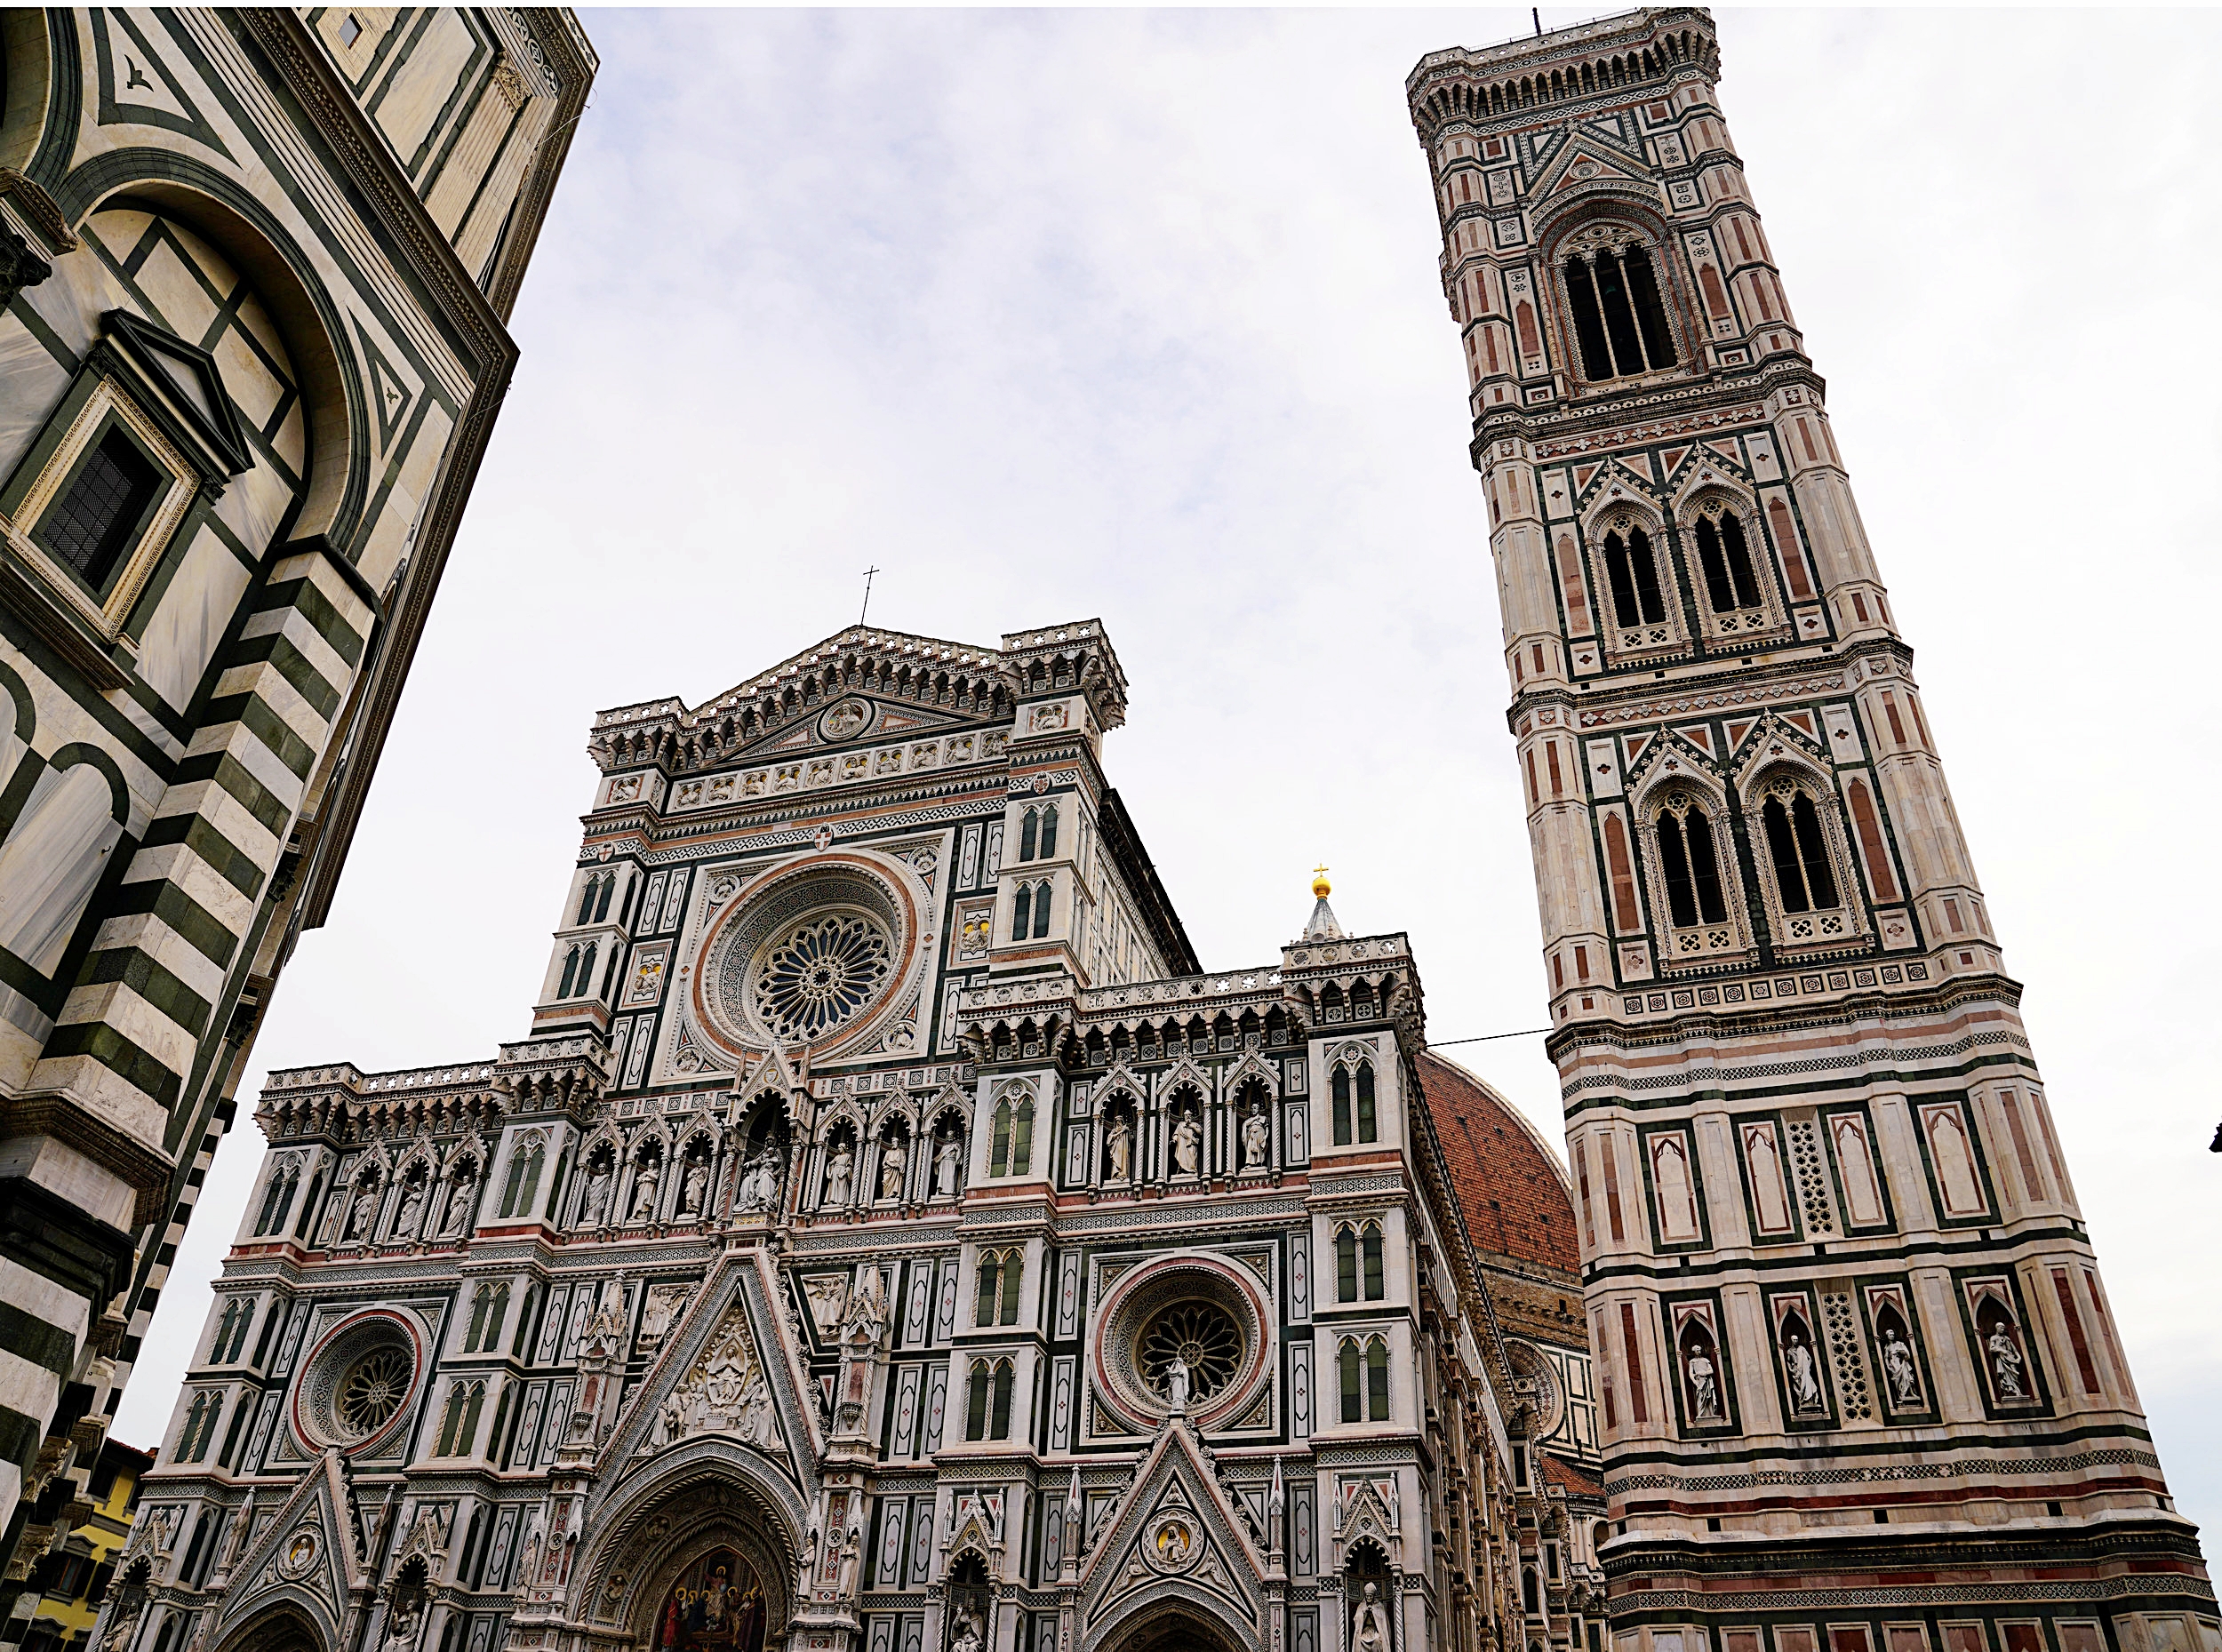  The Duomo and Bell Tower at Florence cathedral.  